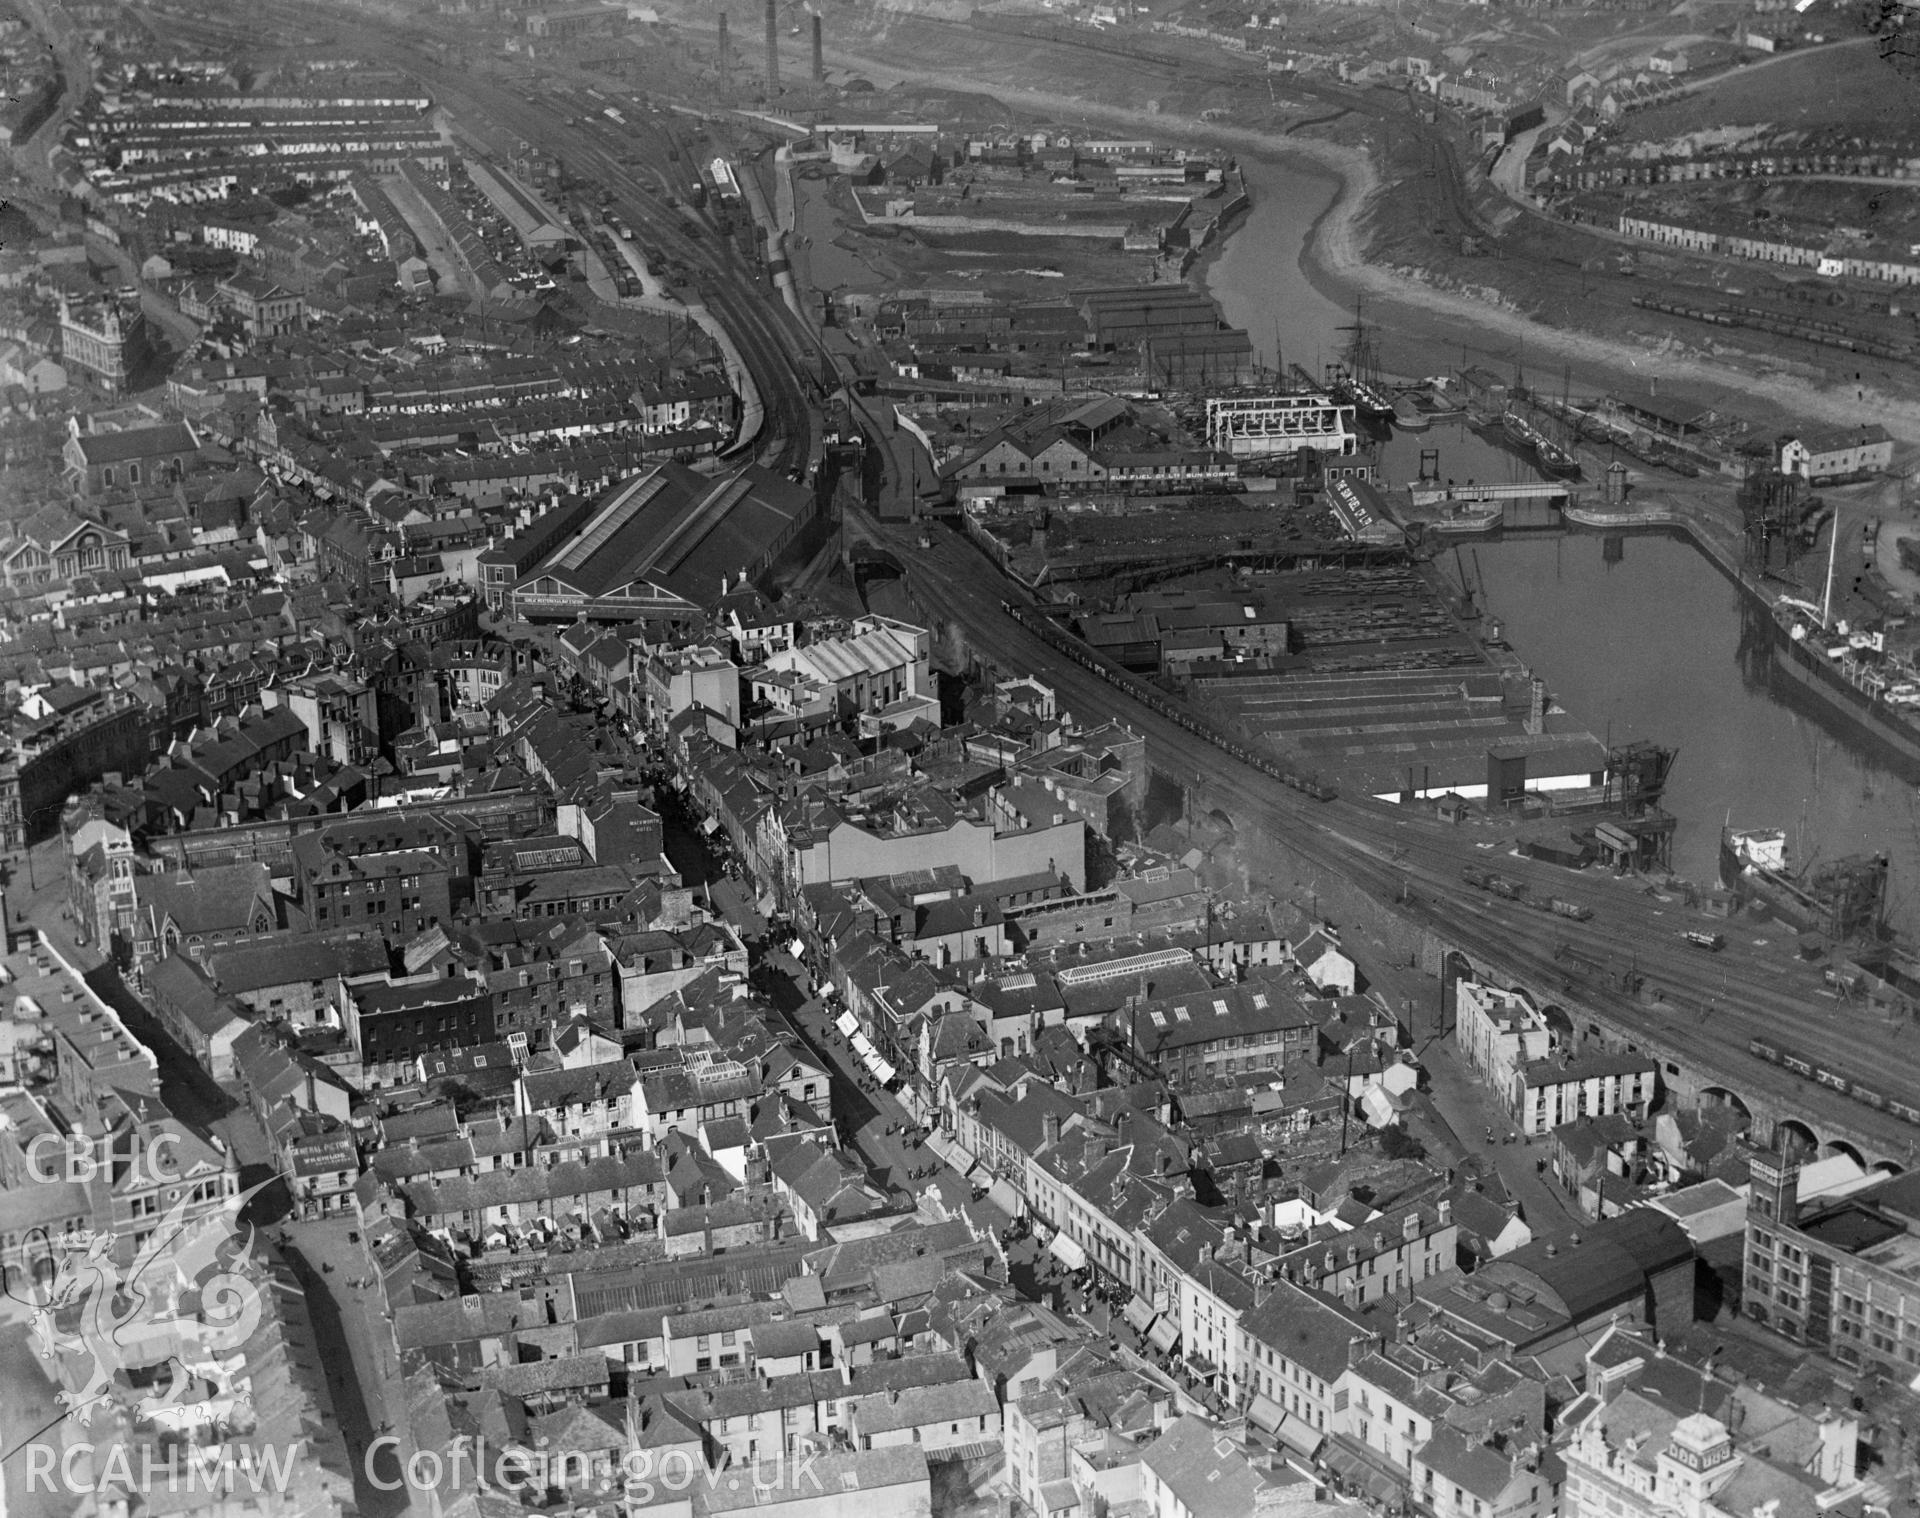 View of Swansea showing the docks and part of town centre, oblique aerial view. 5?x4? black and white glass plate negative.